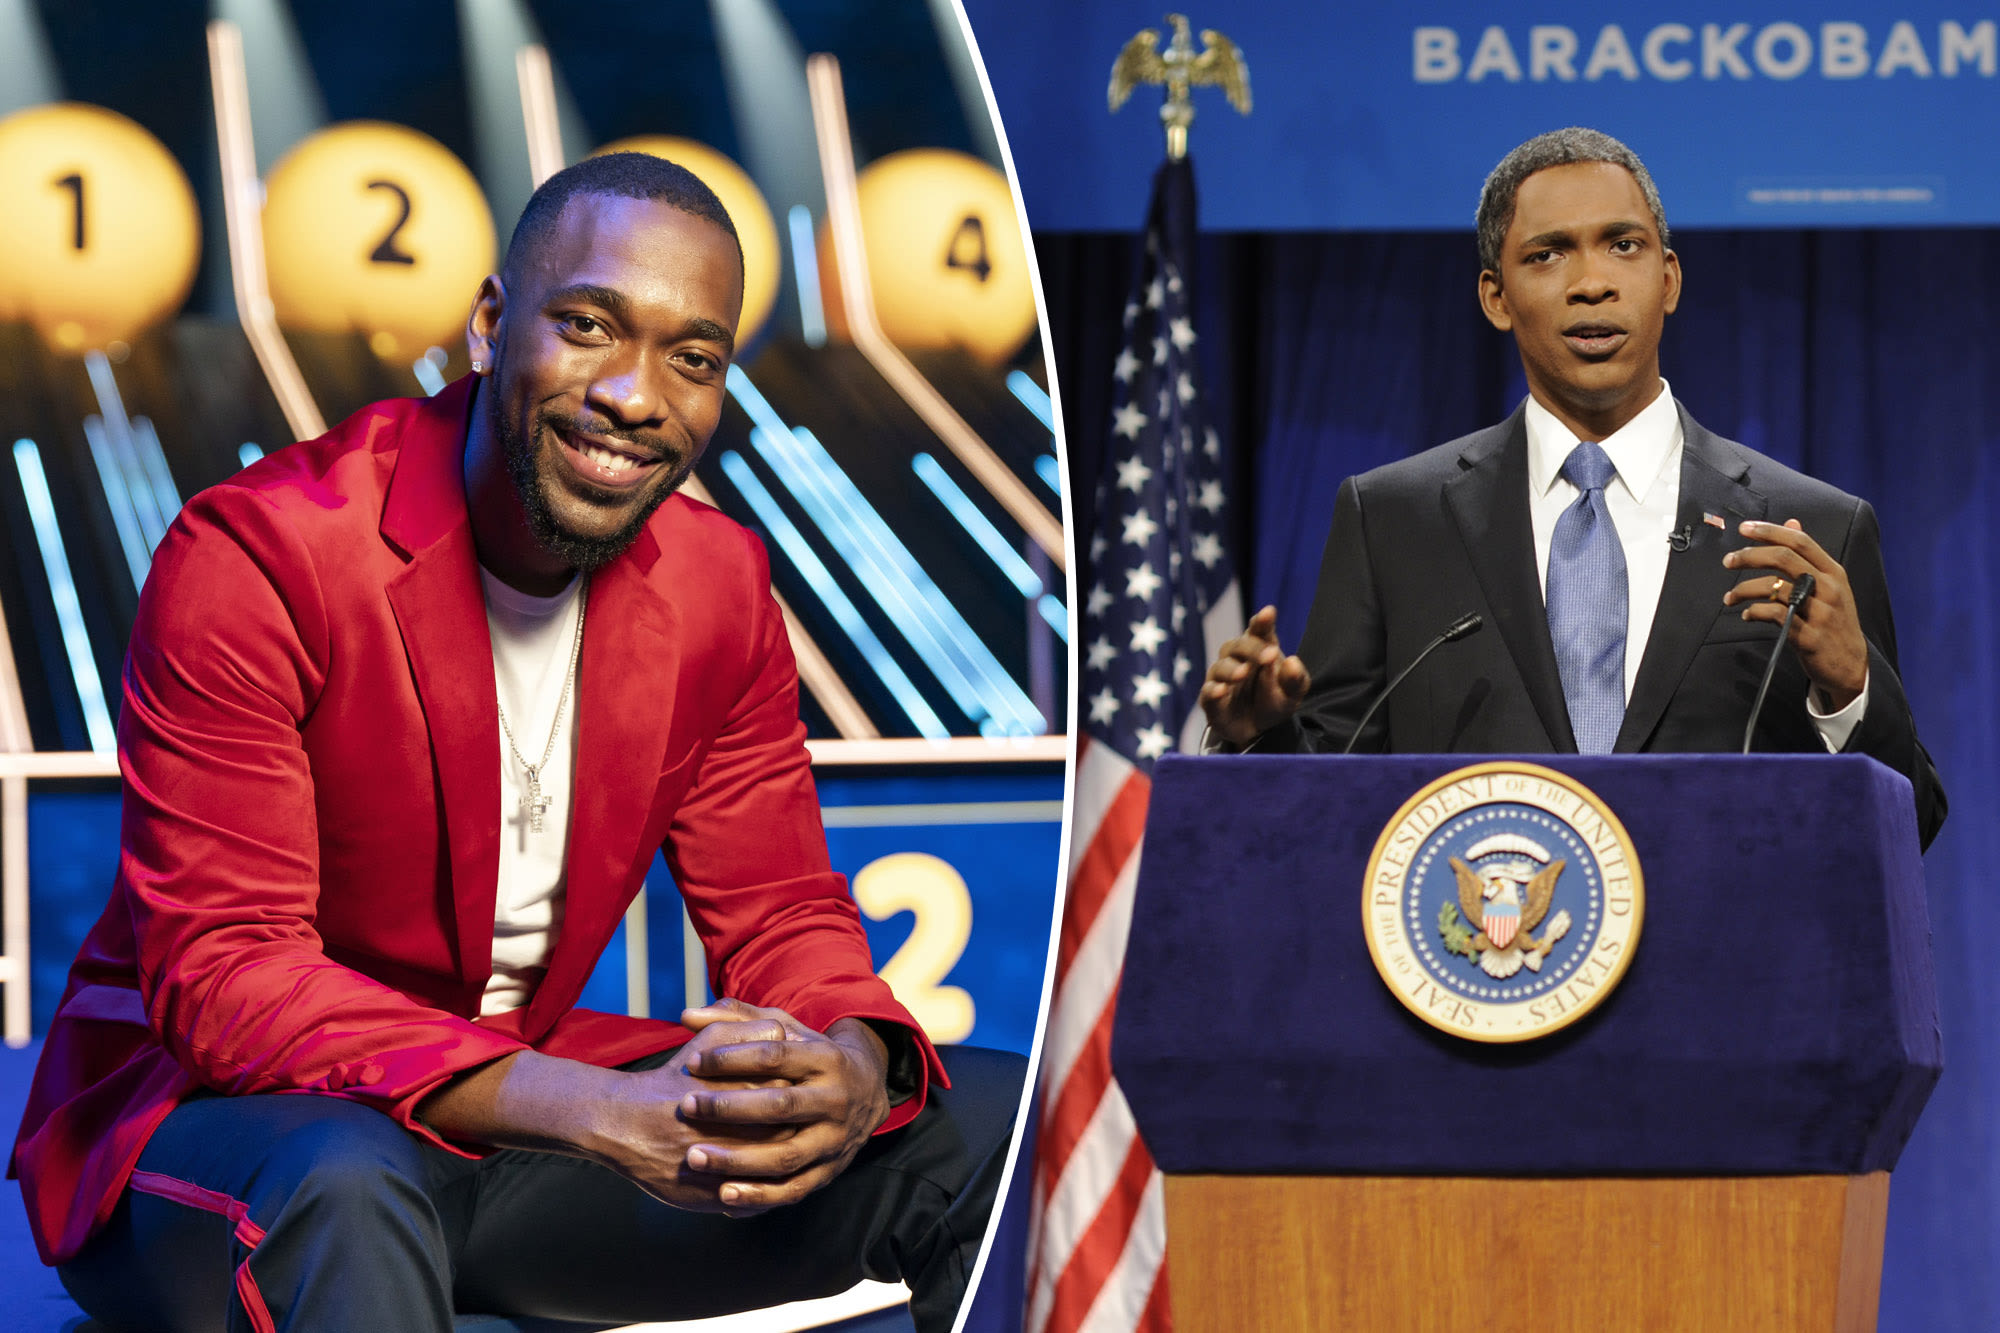 ‘SNL’ alum Jay Pharoah jokes about Kenan Thompson: ‘I thought he was supposed to leave at some point!’